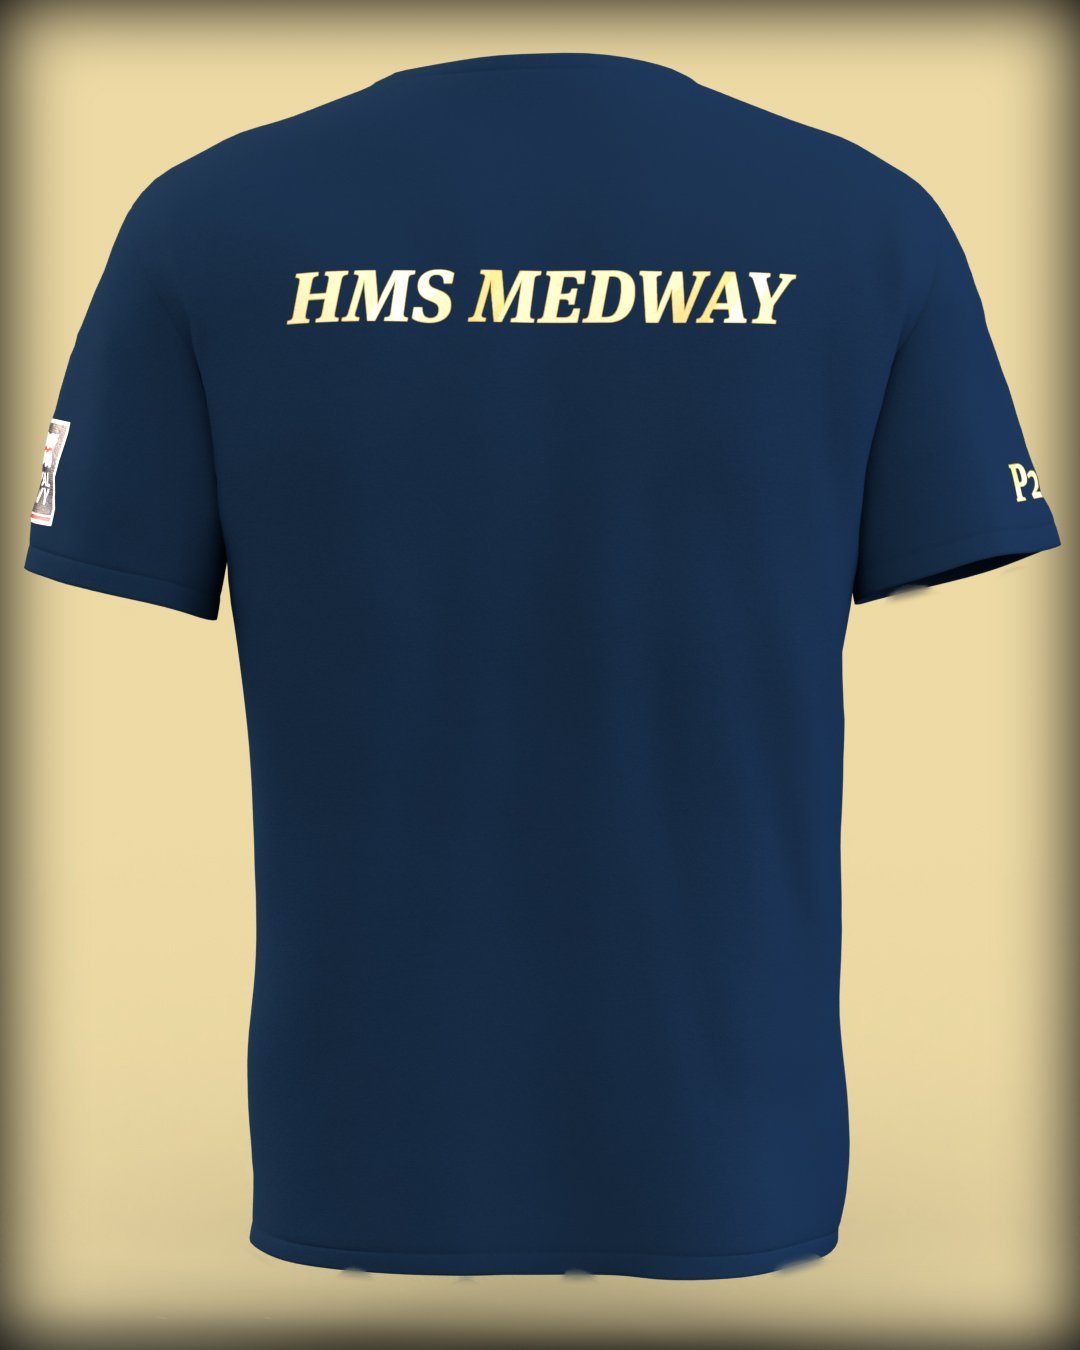 HMS Medway Crest on Navy Blue Tee (Customisable) - Cleekers